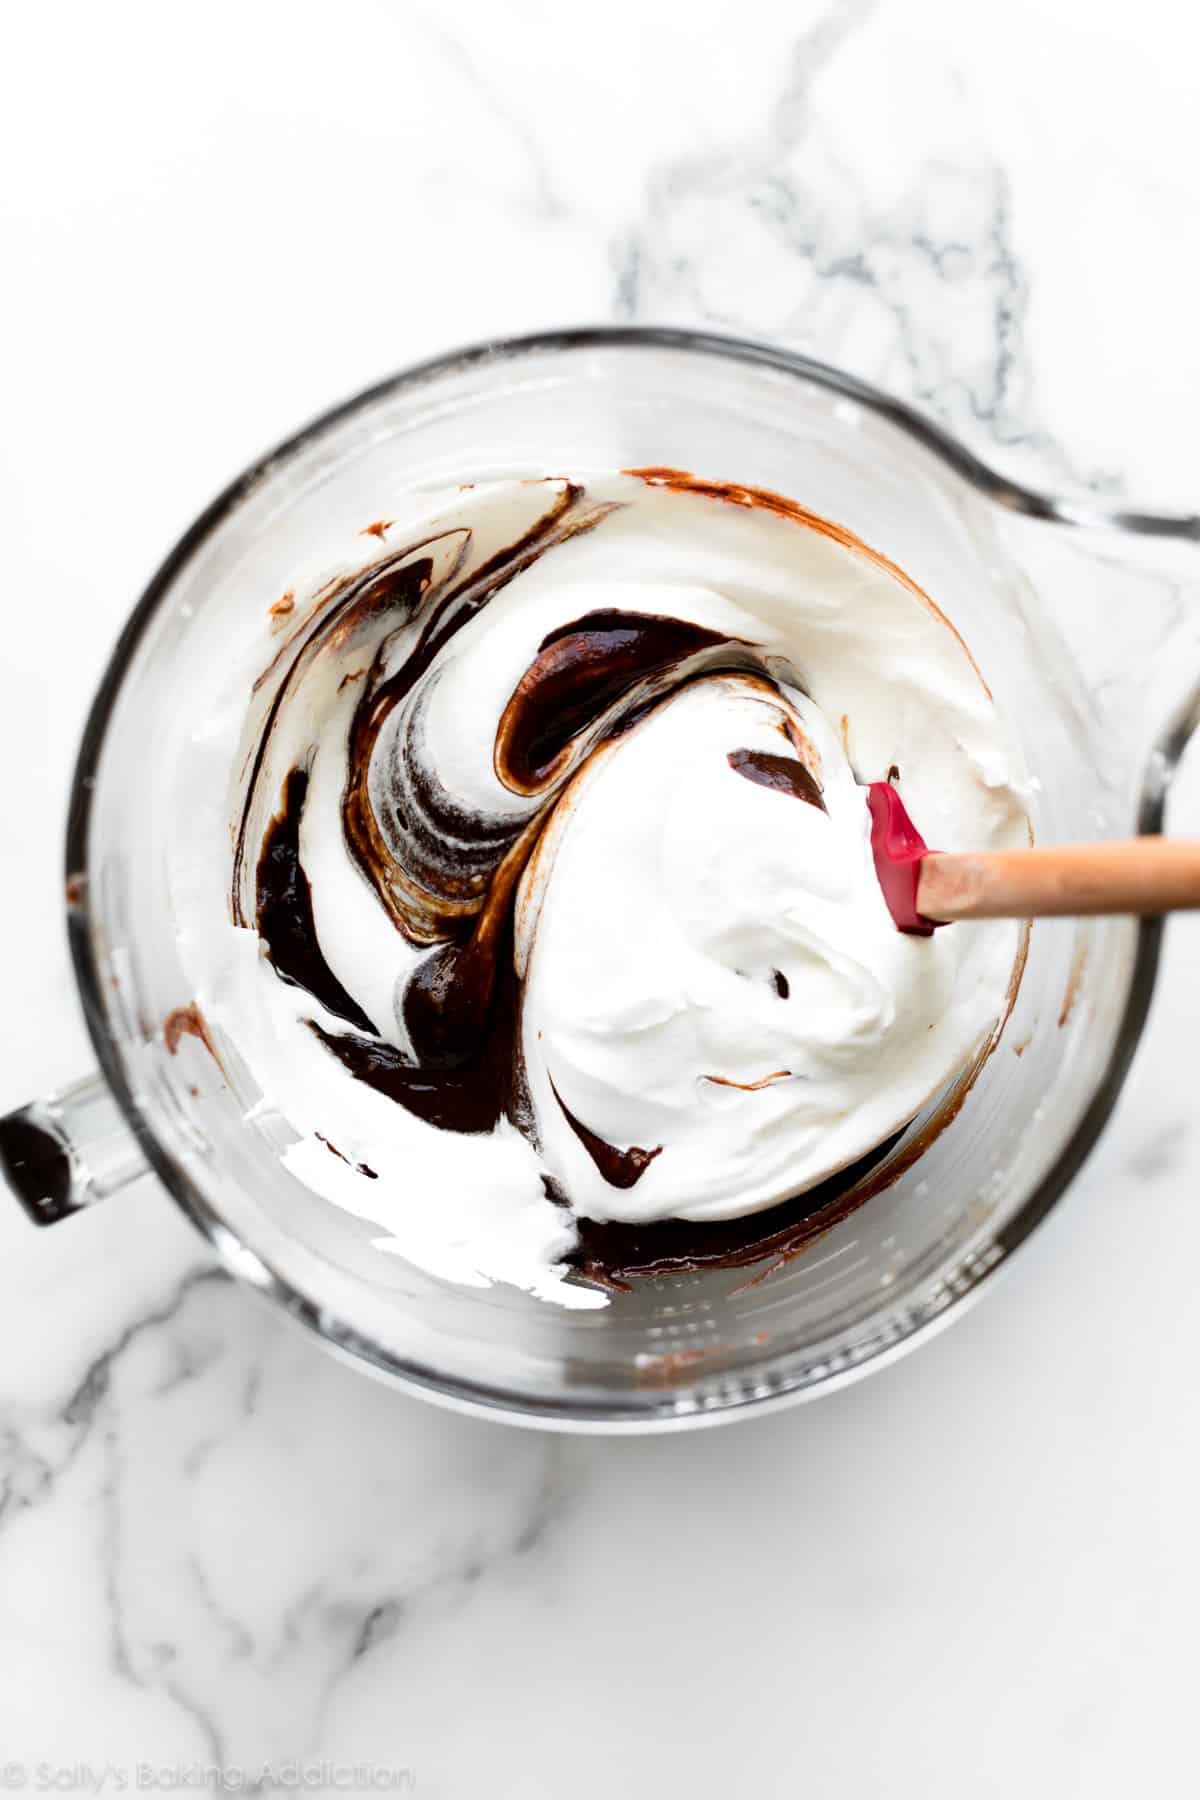 French silk pie filling in a glass bowl